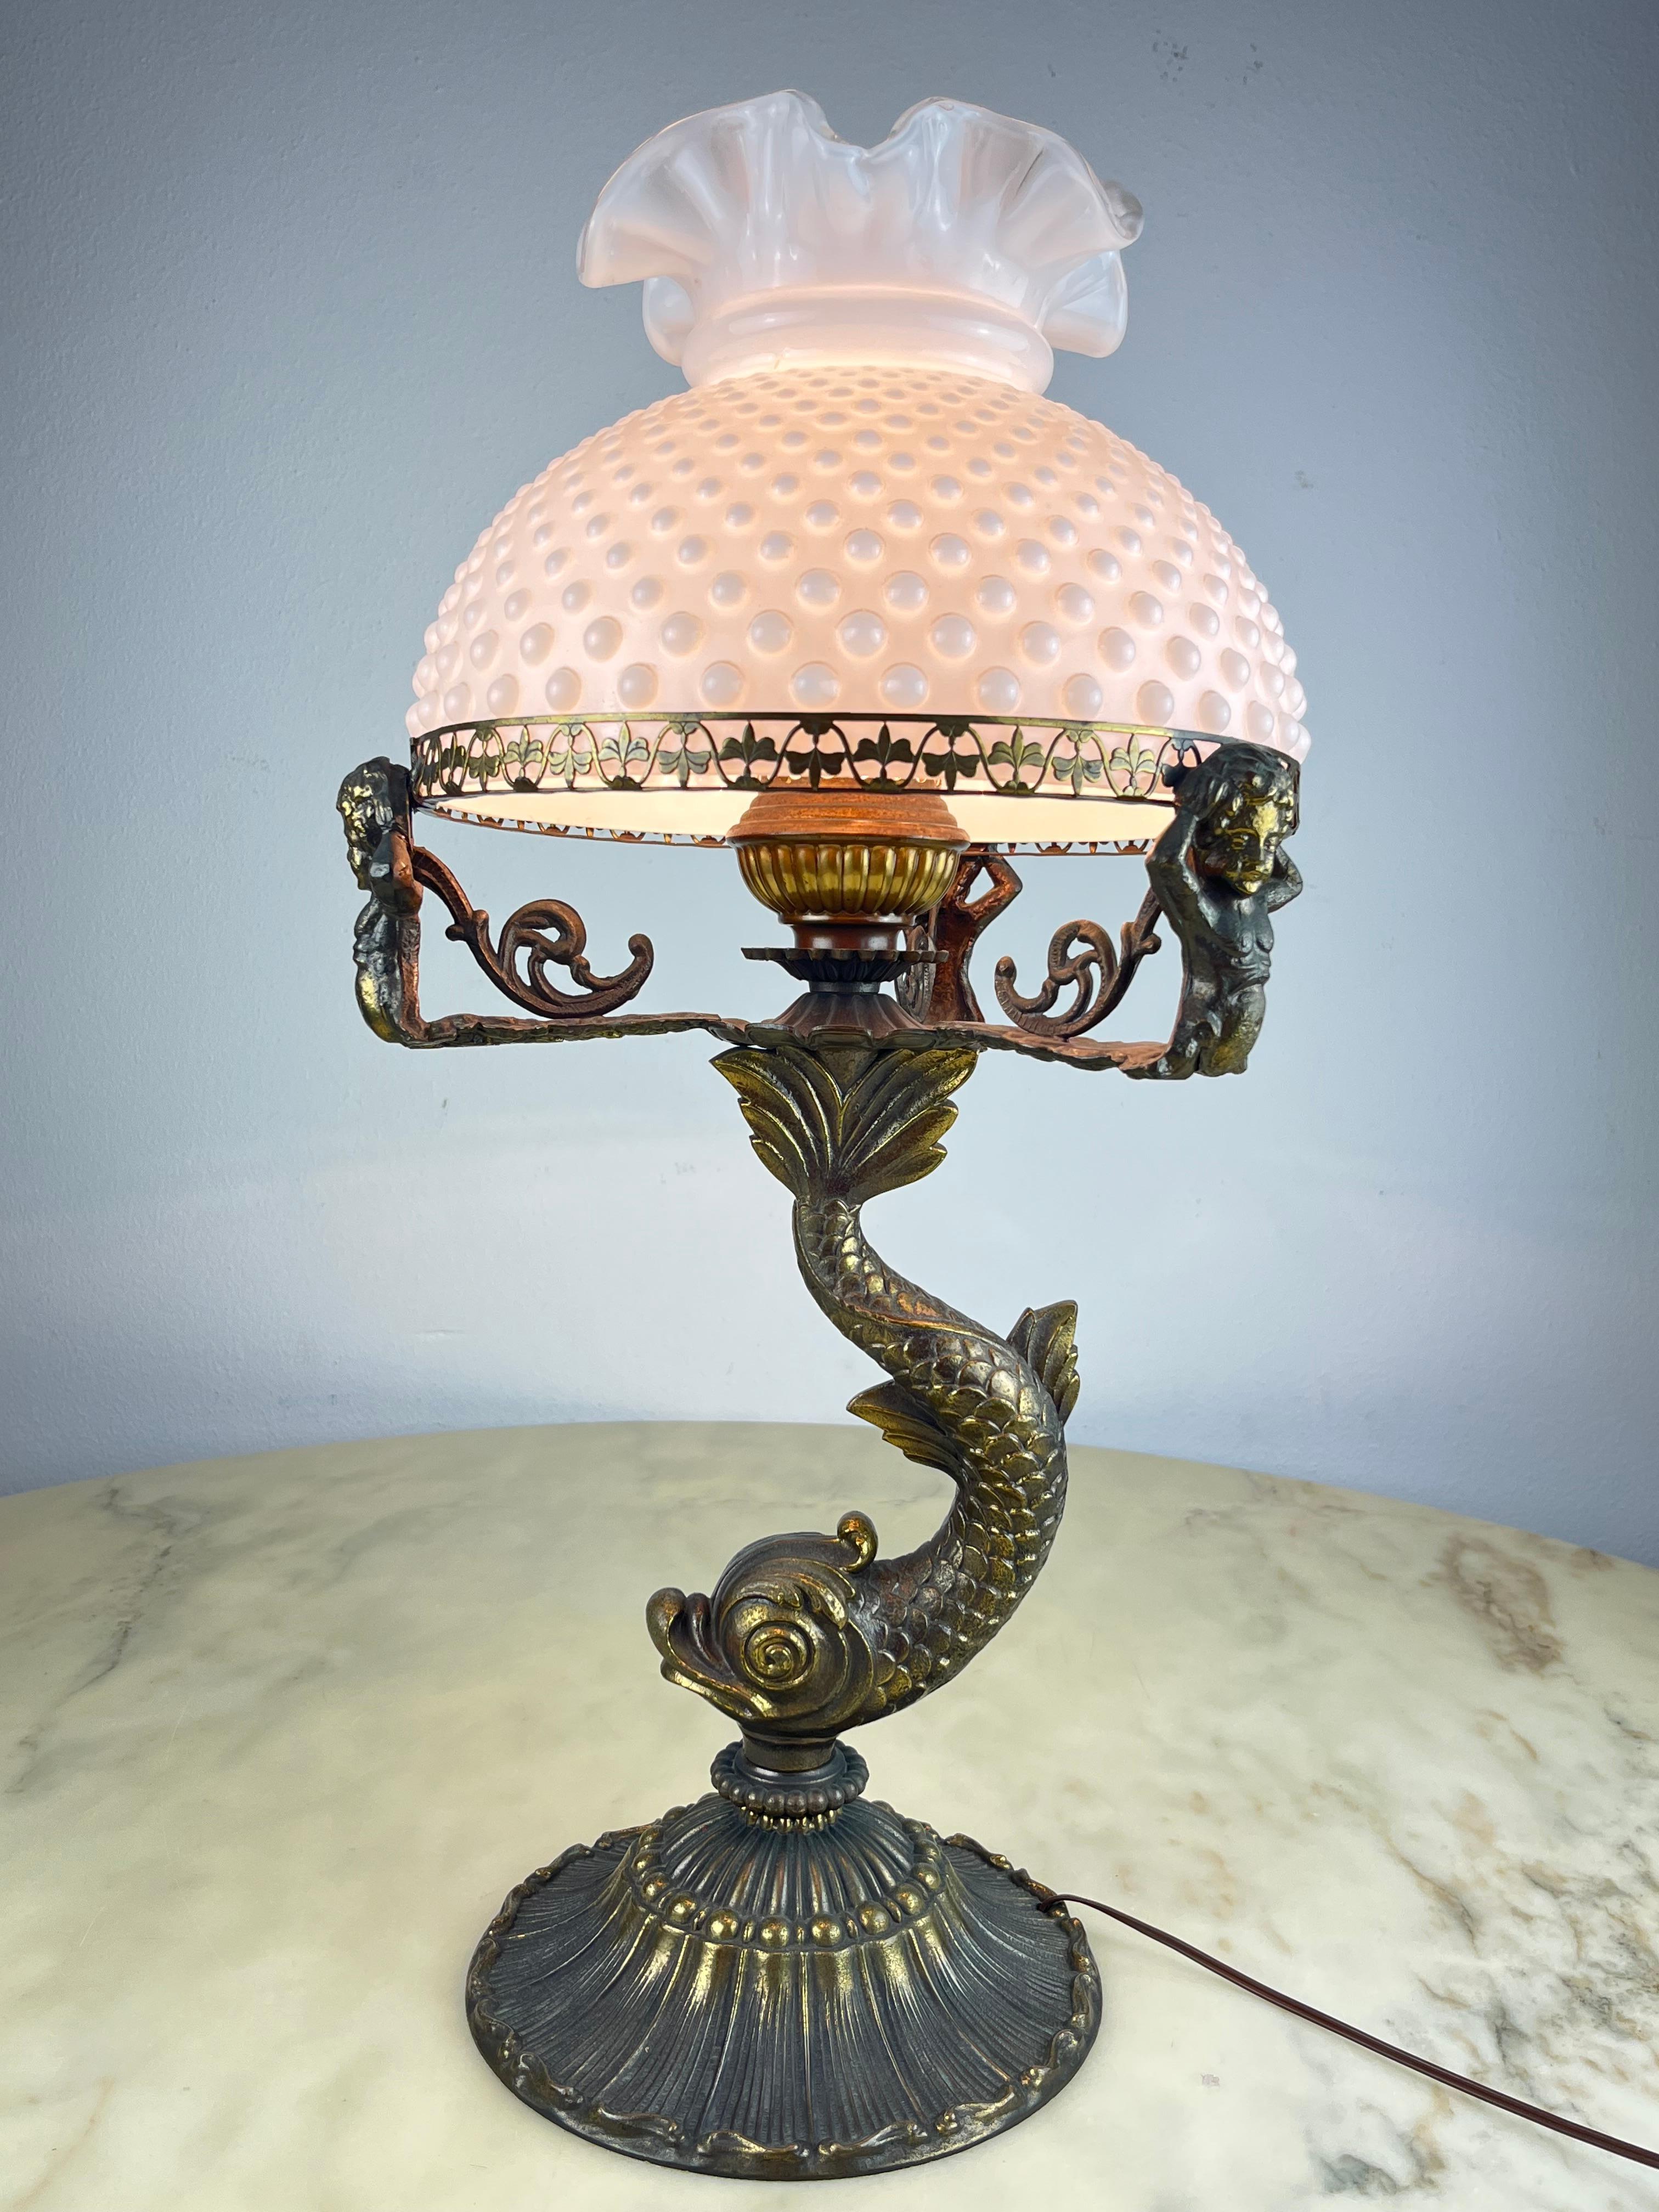 Bronze table lamp, Italy, 1950s
Found in a notary's office, it is intact and functional (E27 lamp).
Good condition, has a milky glass bowl.
Small signs of aging.